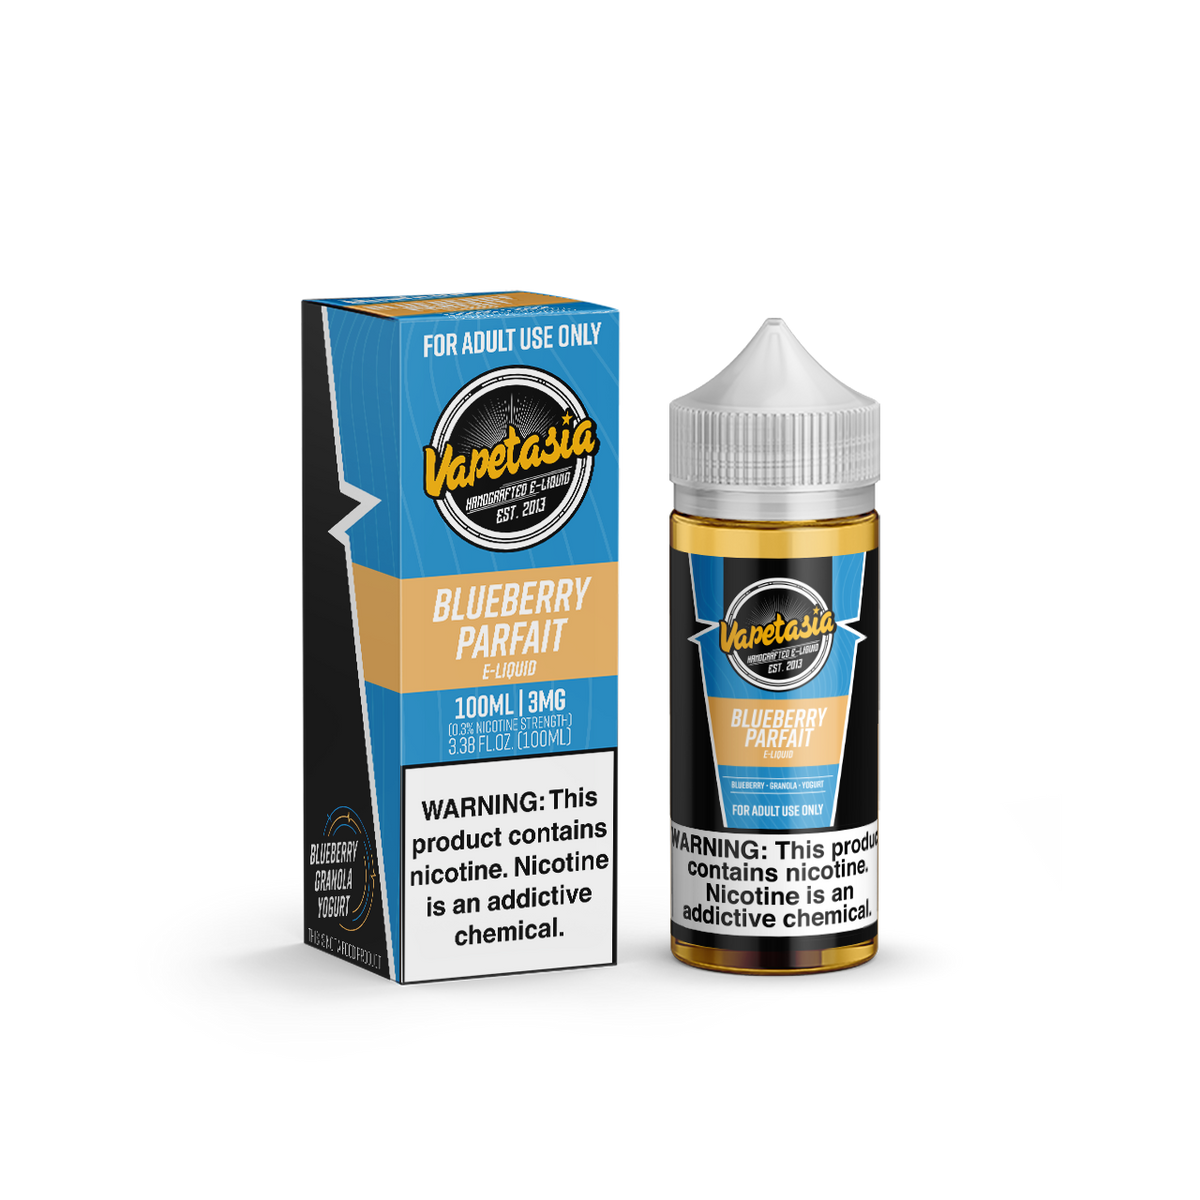 Blueberry Parfait by Vapetasia Series 100mL with Packaging